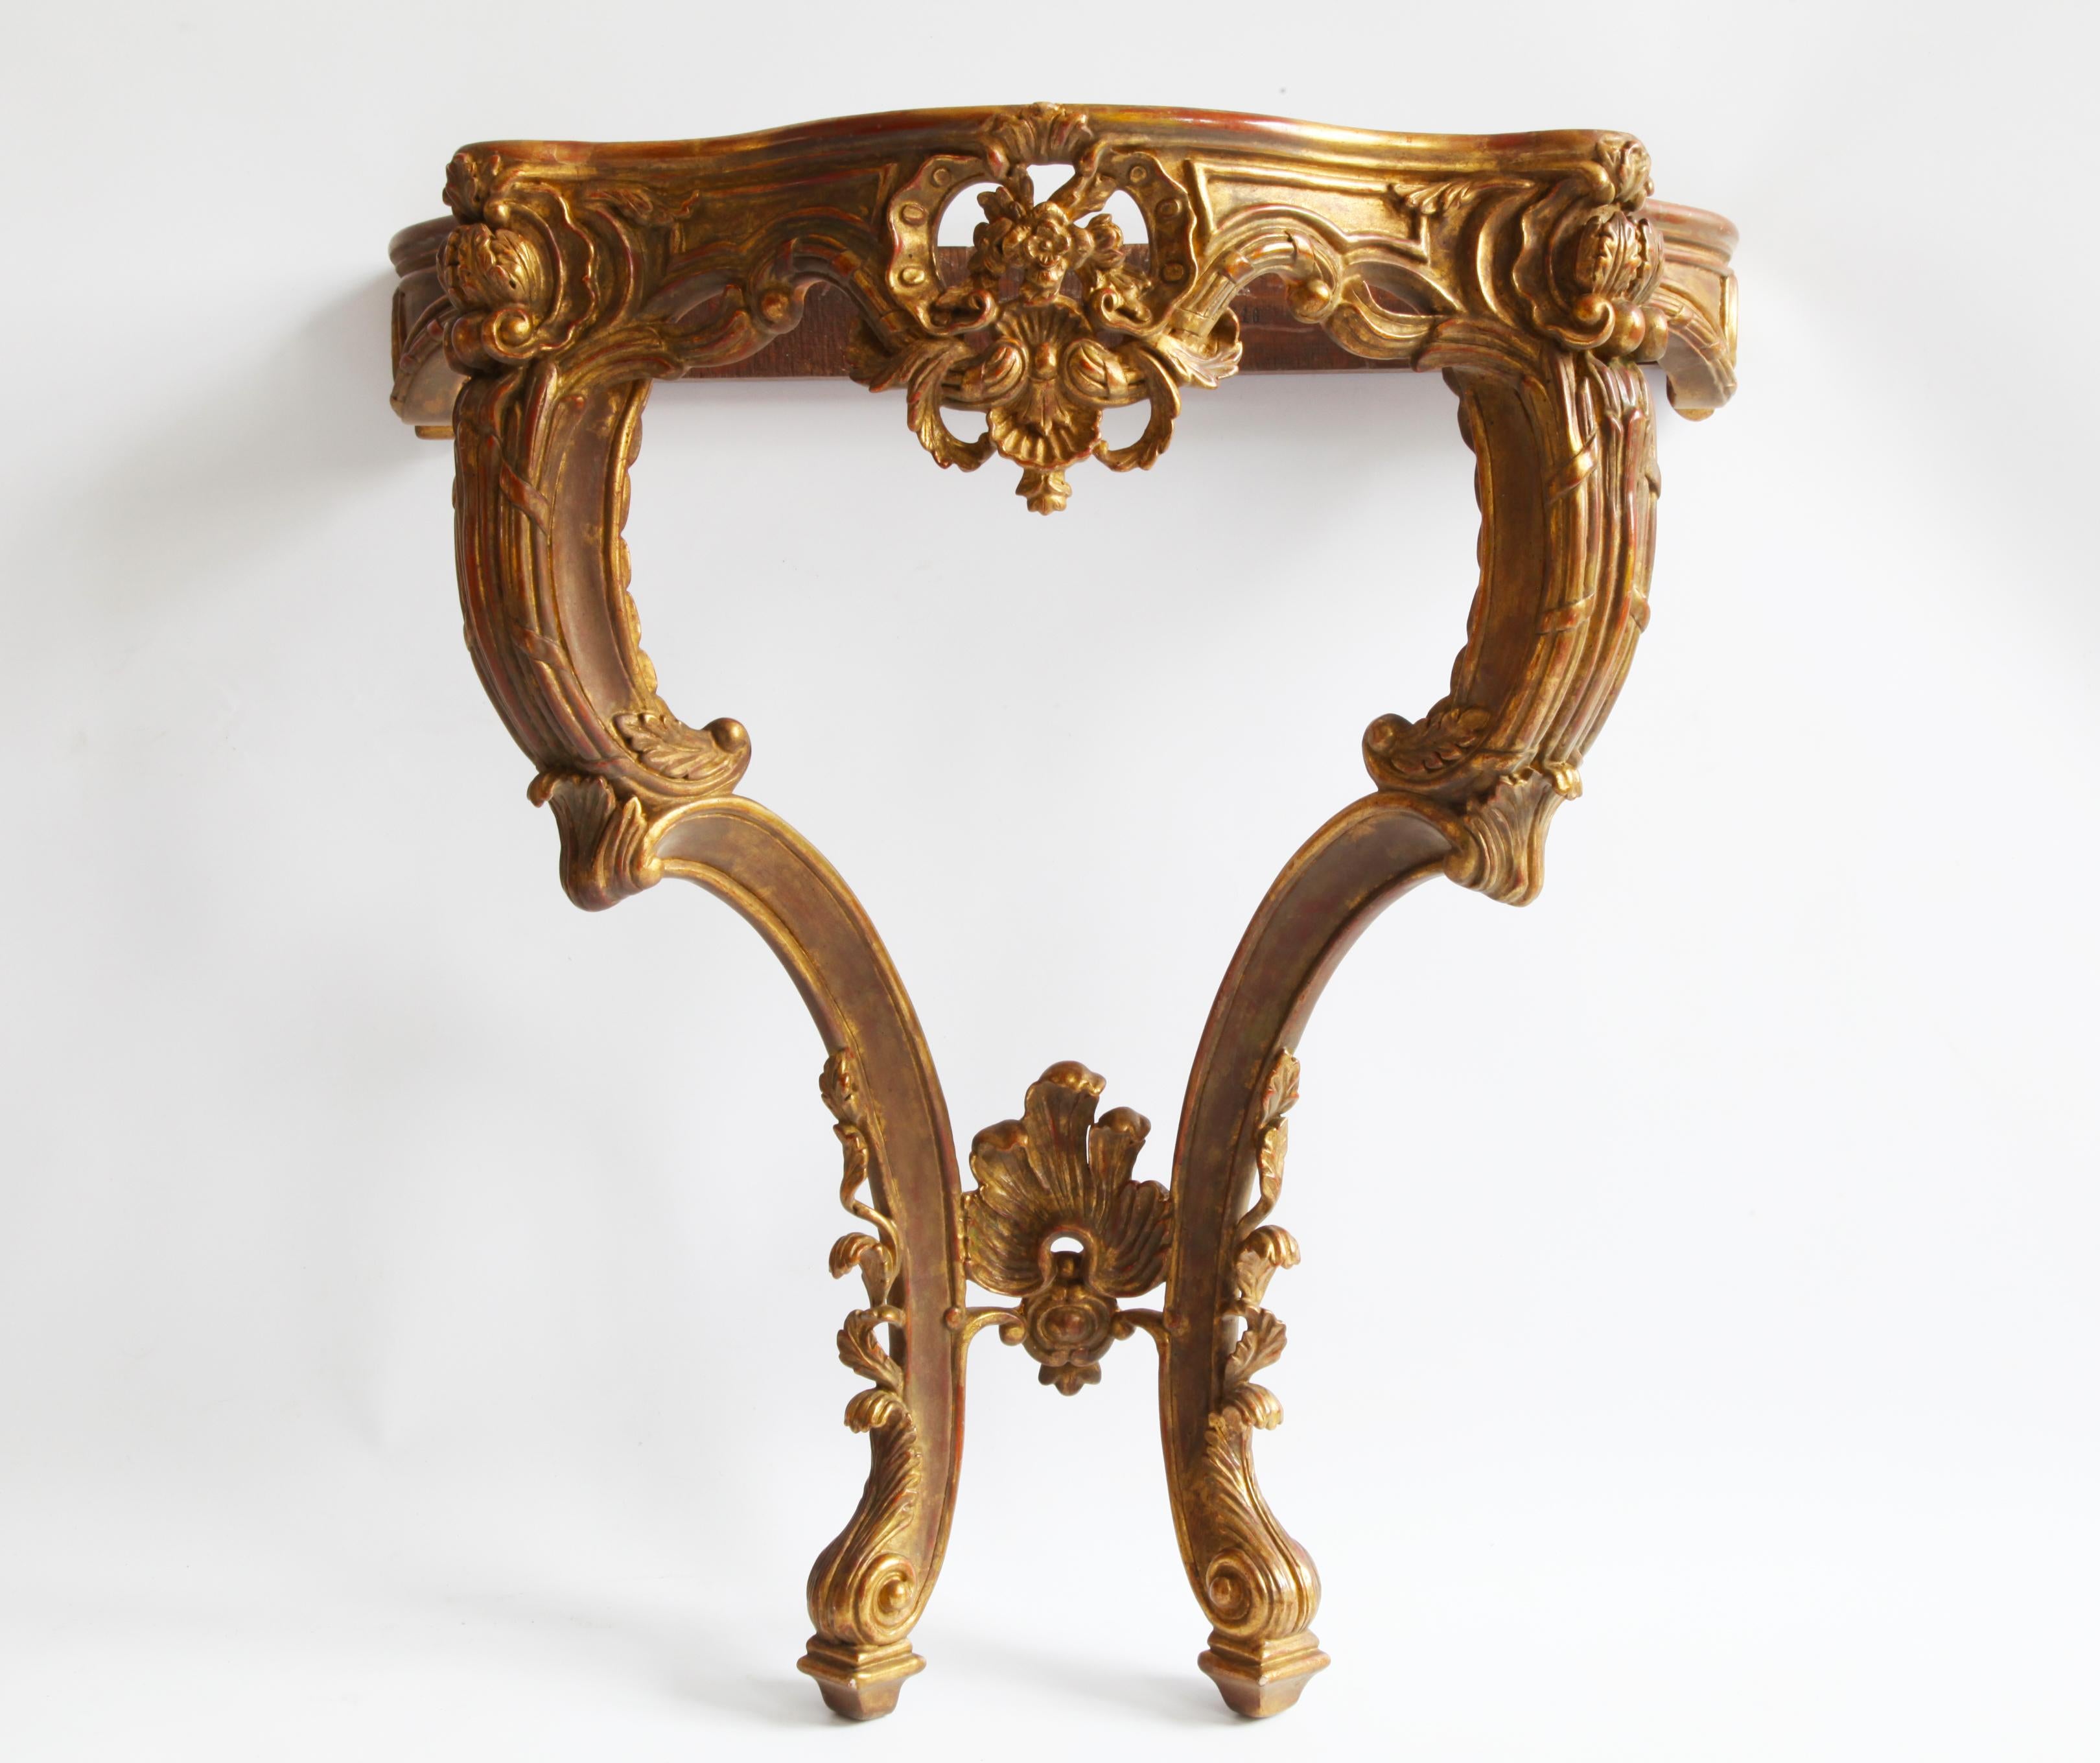 English Pair of Rococo Style Giltwood Consoles Reproduced by La Maison London